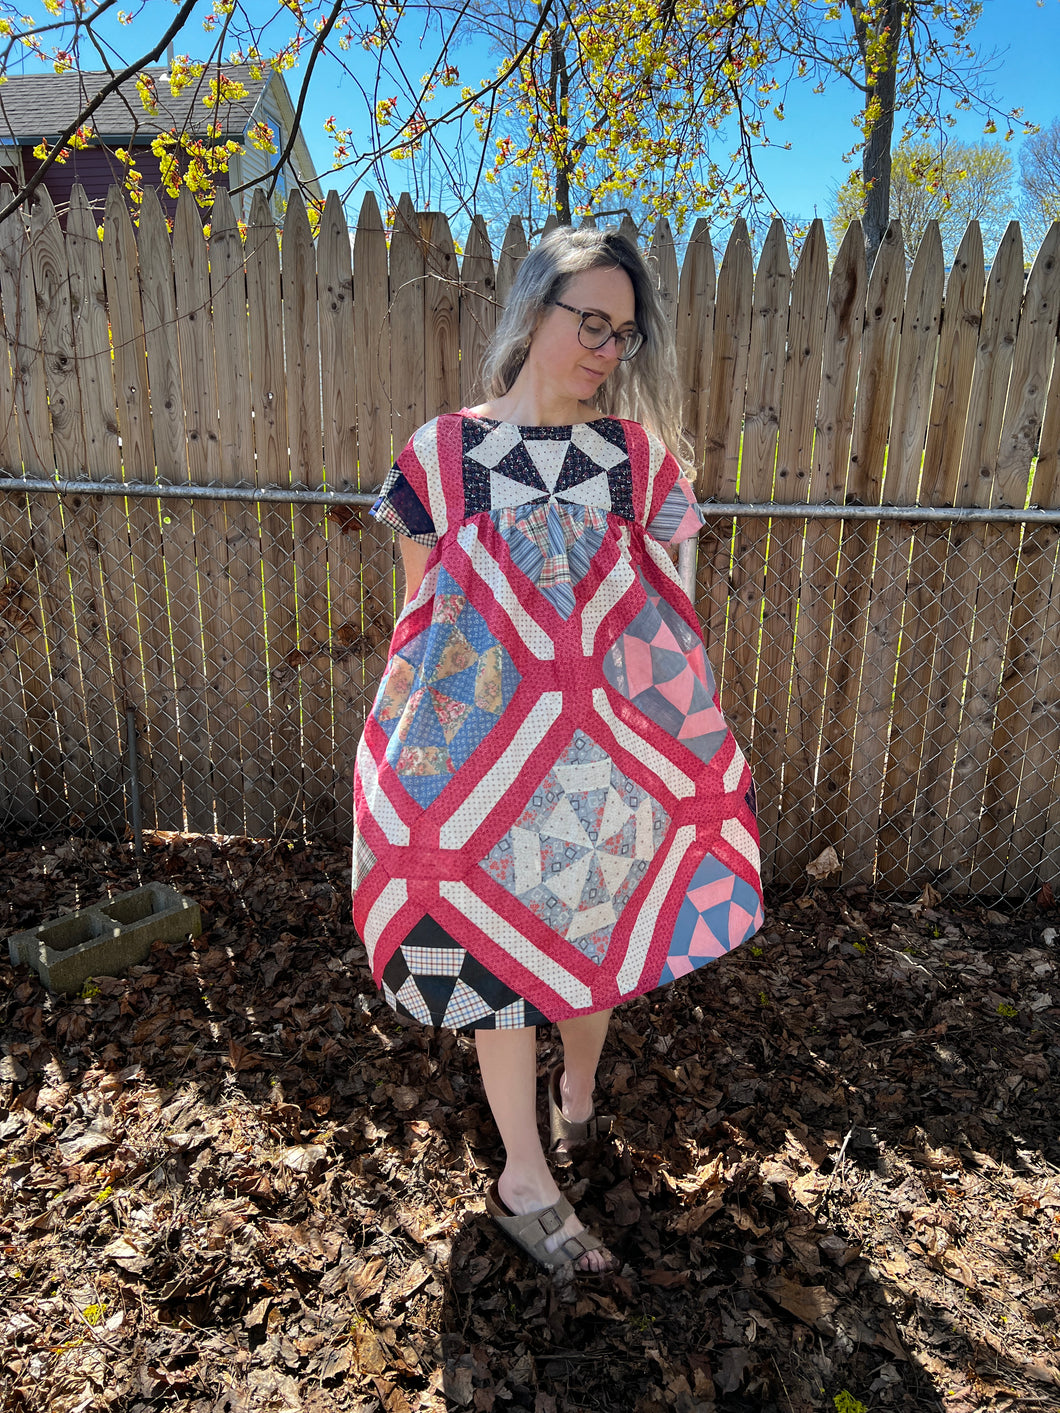 One-of-a-Kind: Spider Web Swing Dress